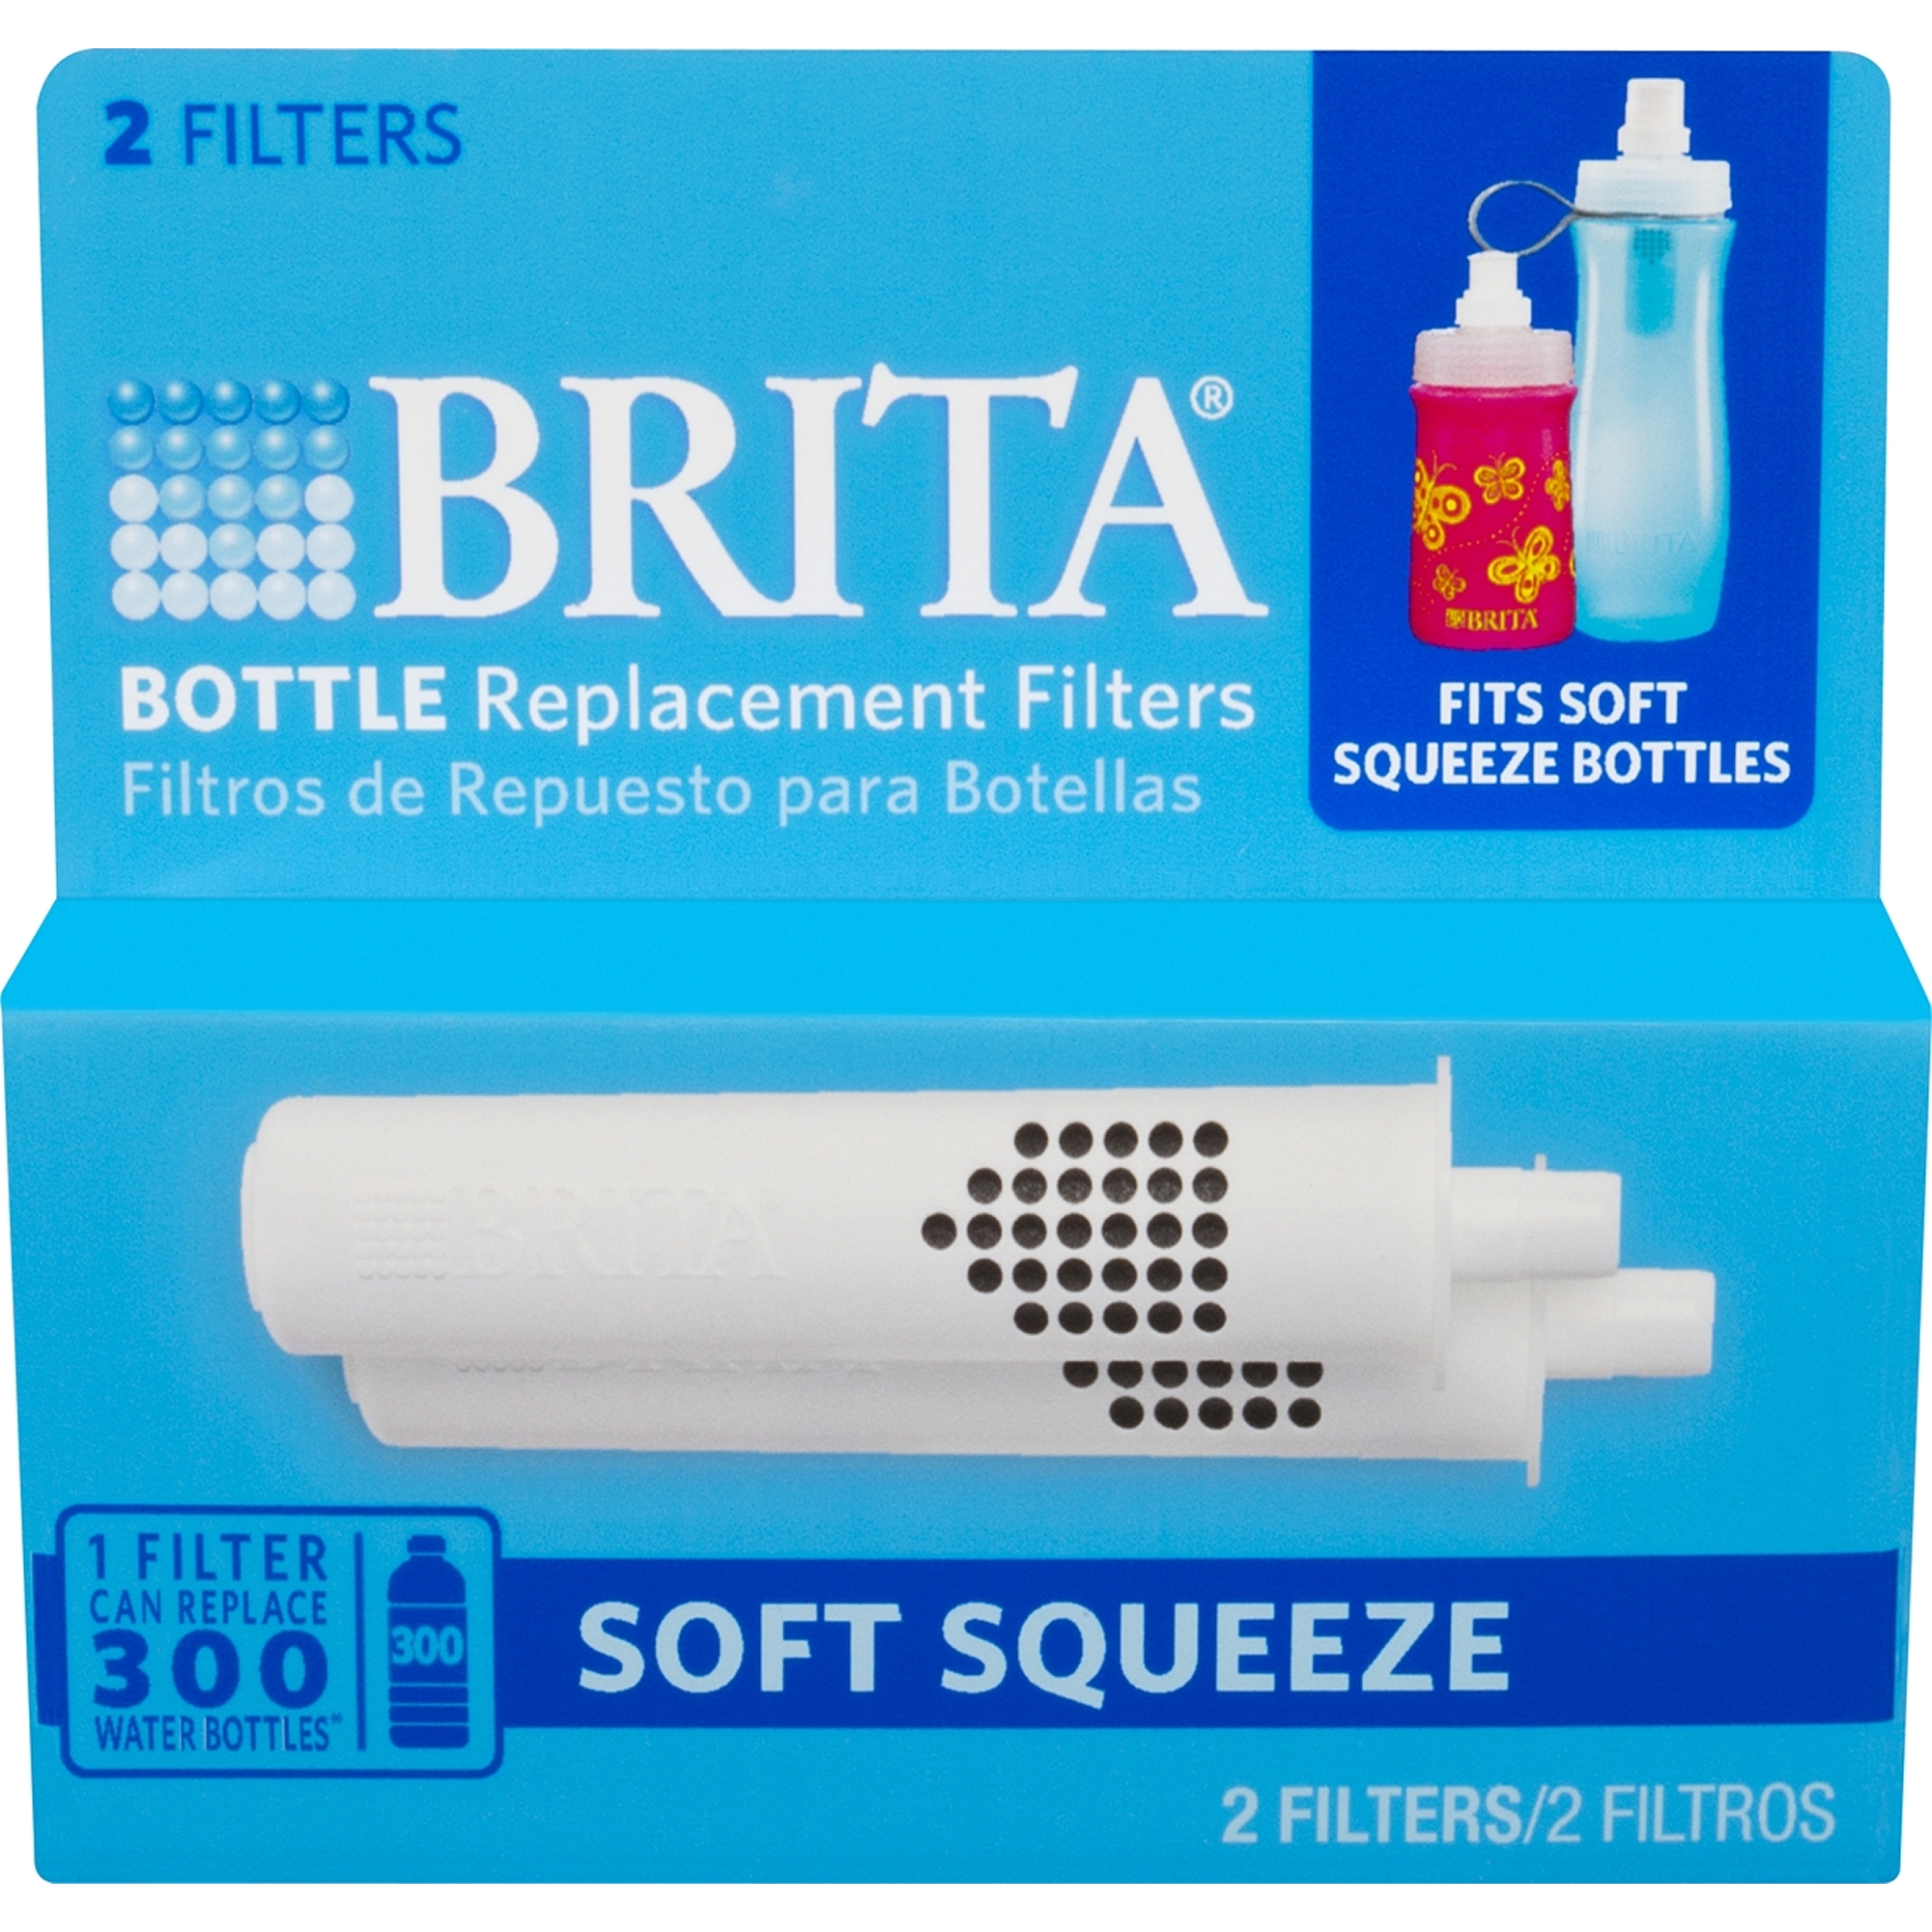 Brita Soft Squeeze Water Filter Bottle Replacement Filters, 2 Count - image 2 of 2